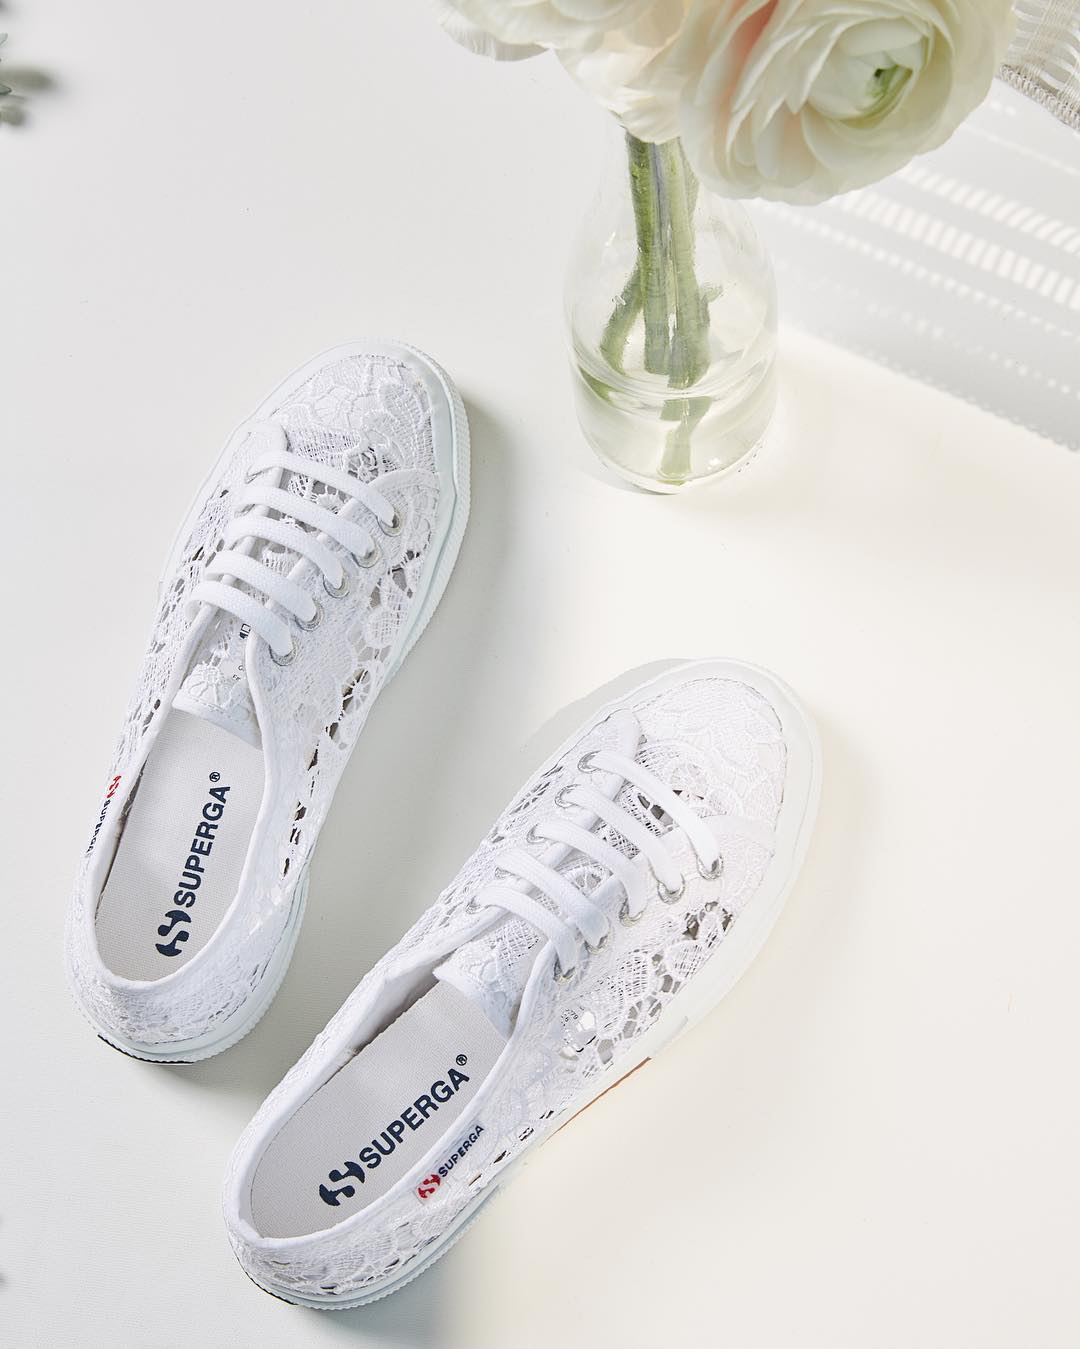 You can get Superga sneakers at up to 70% off in their 4-day flash sale from 14 – 17 Mar 2019 - 6